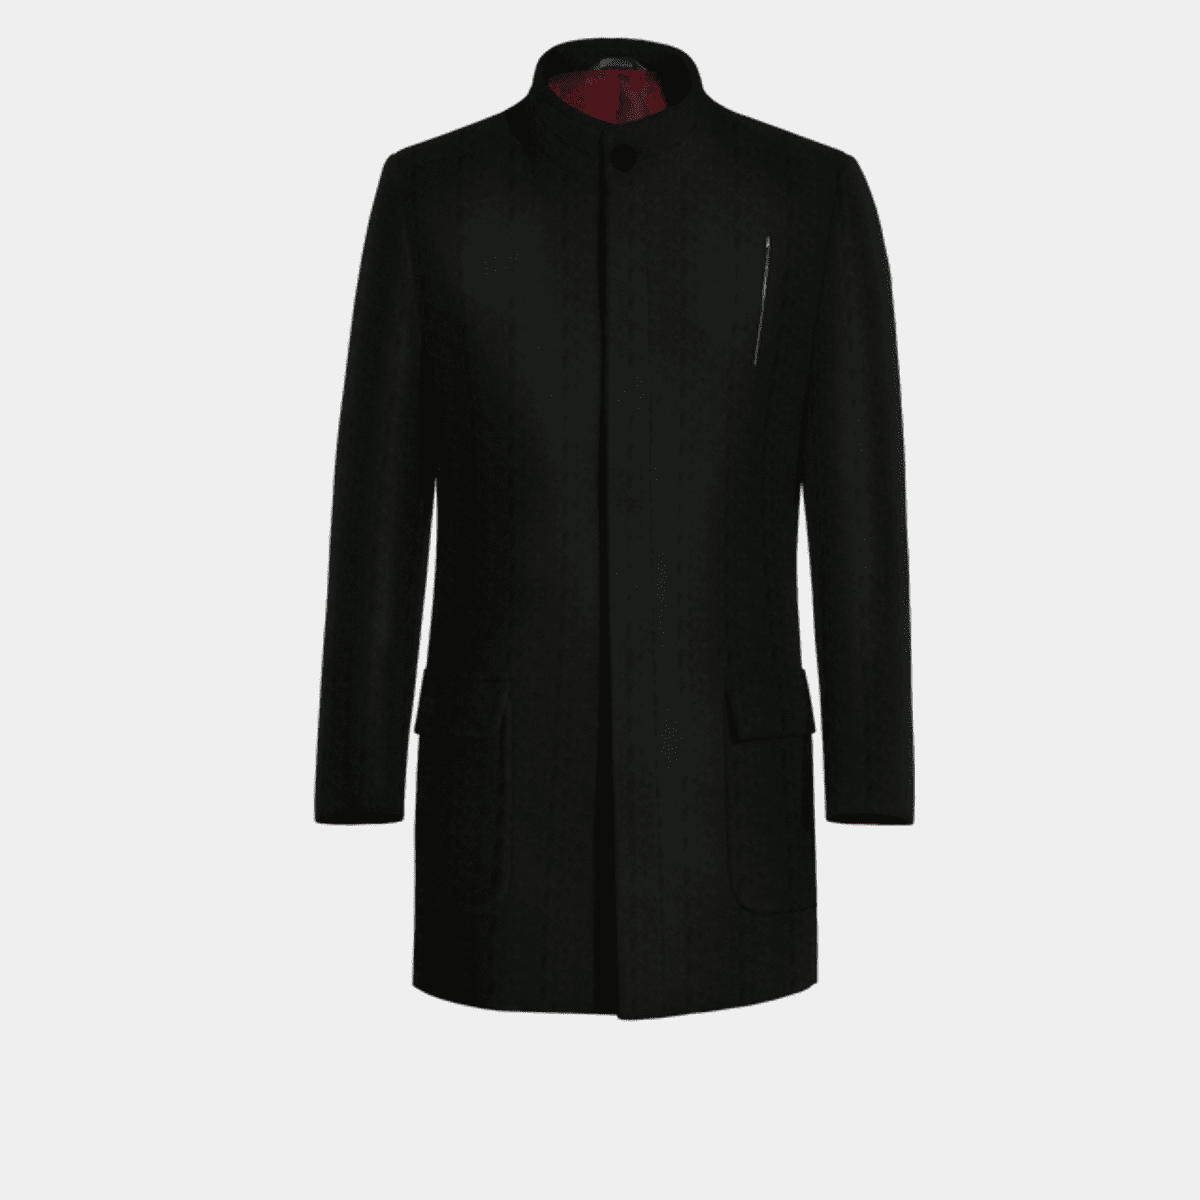 Black Short Funnel neck Coat with contrasted Buttonthreads